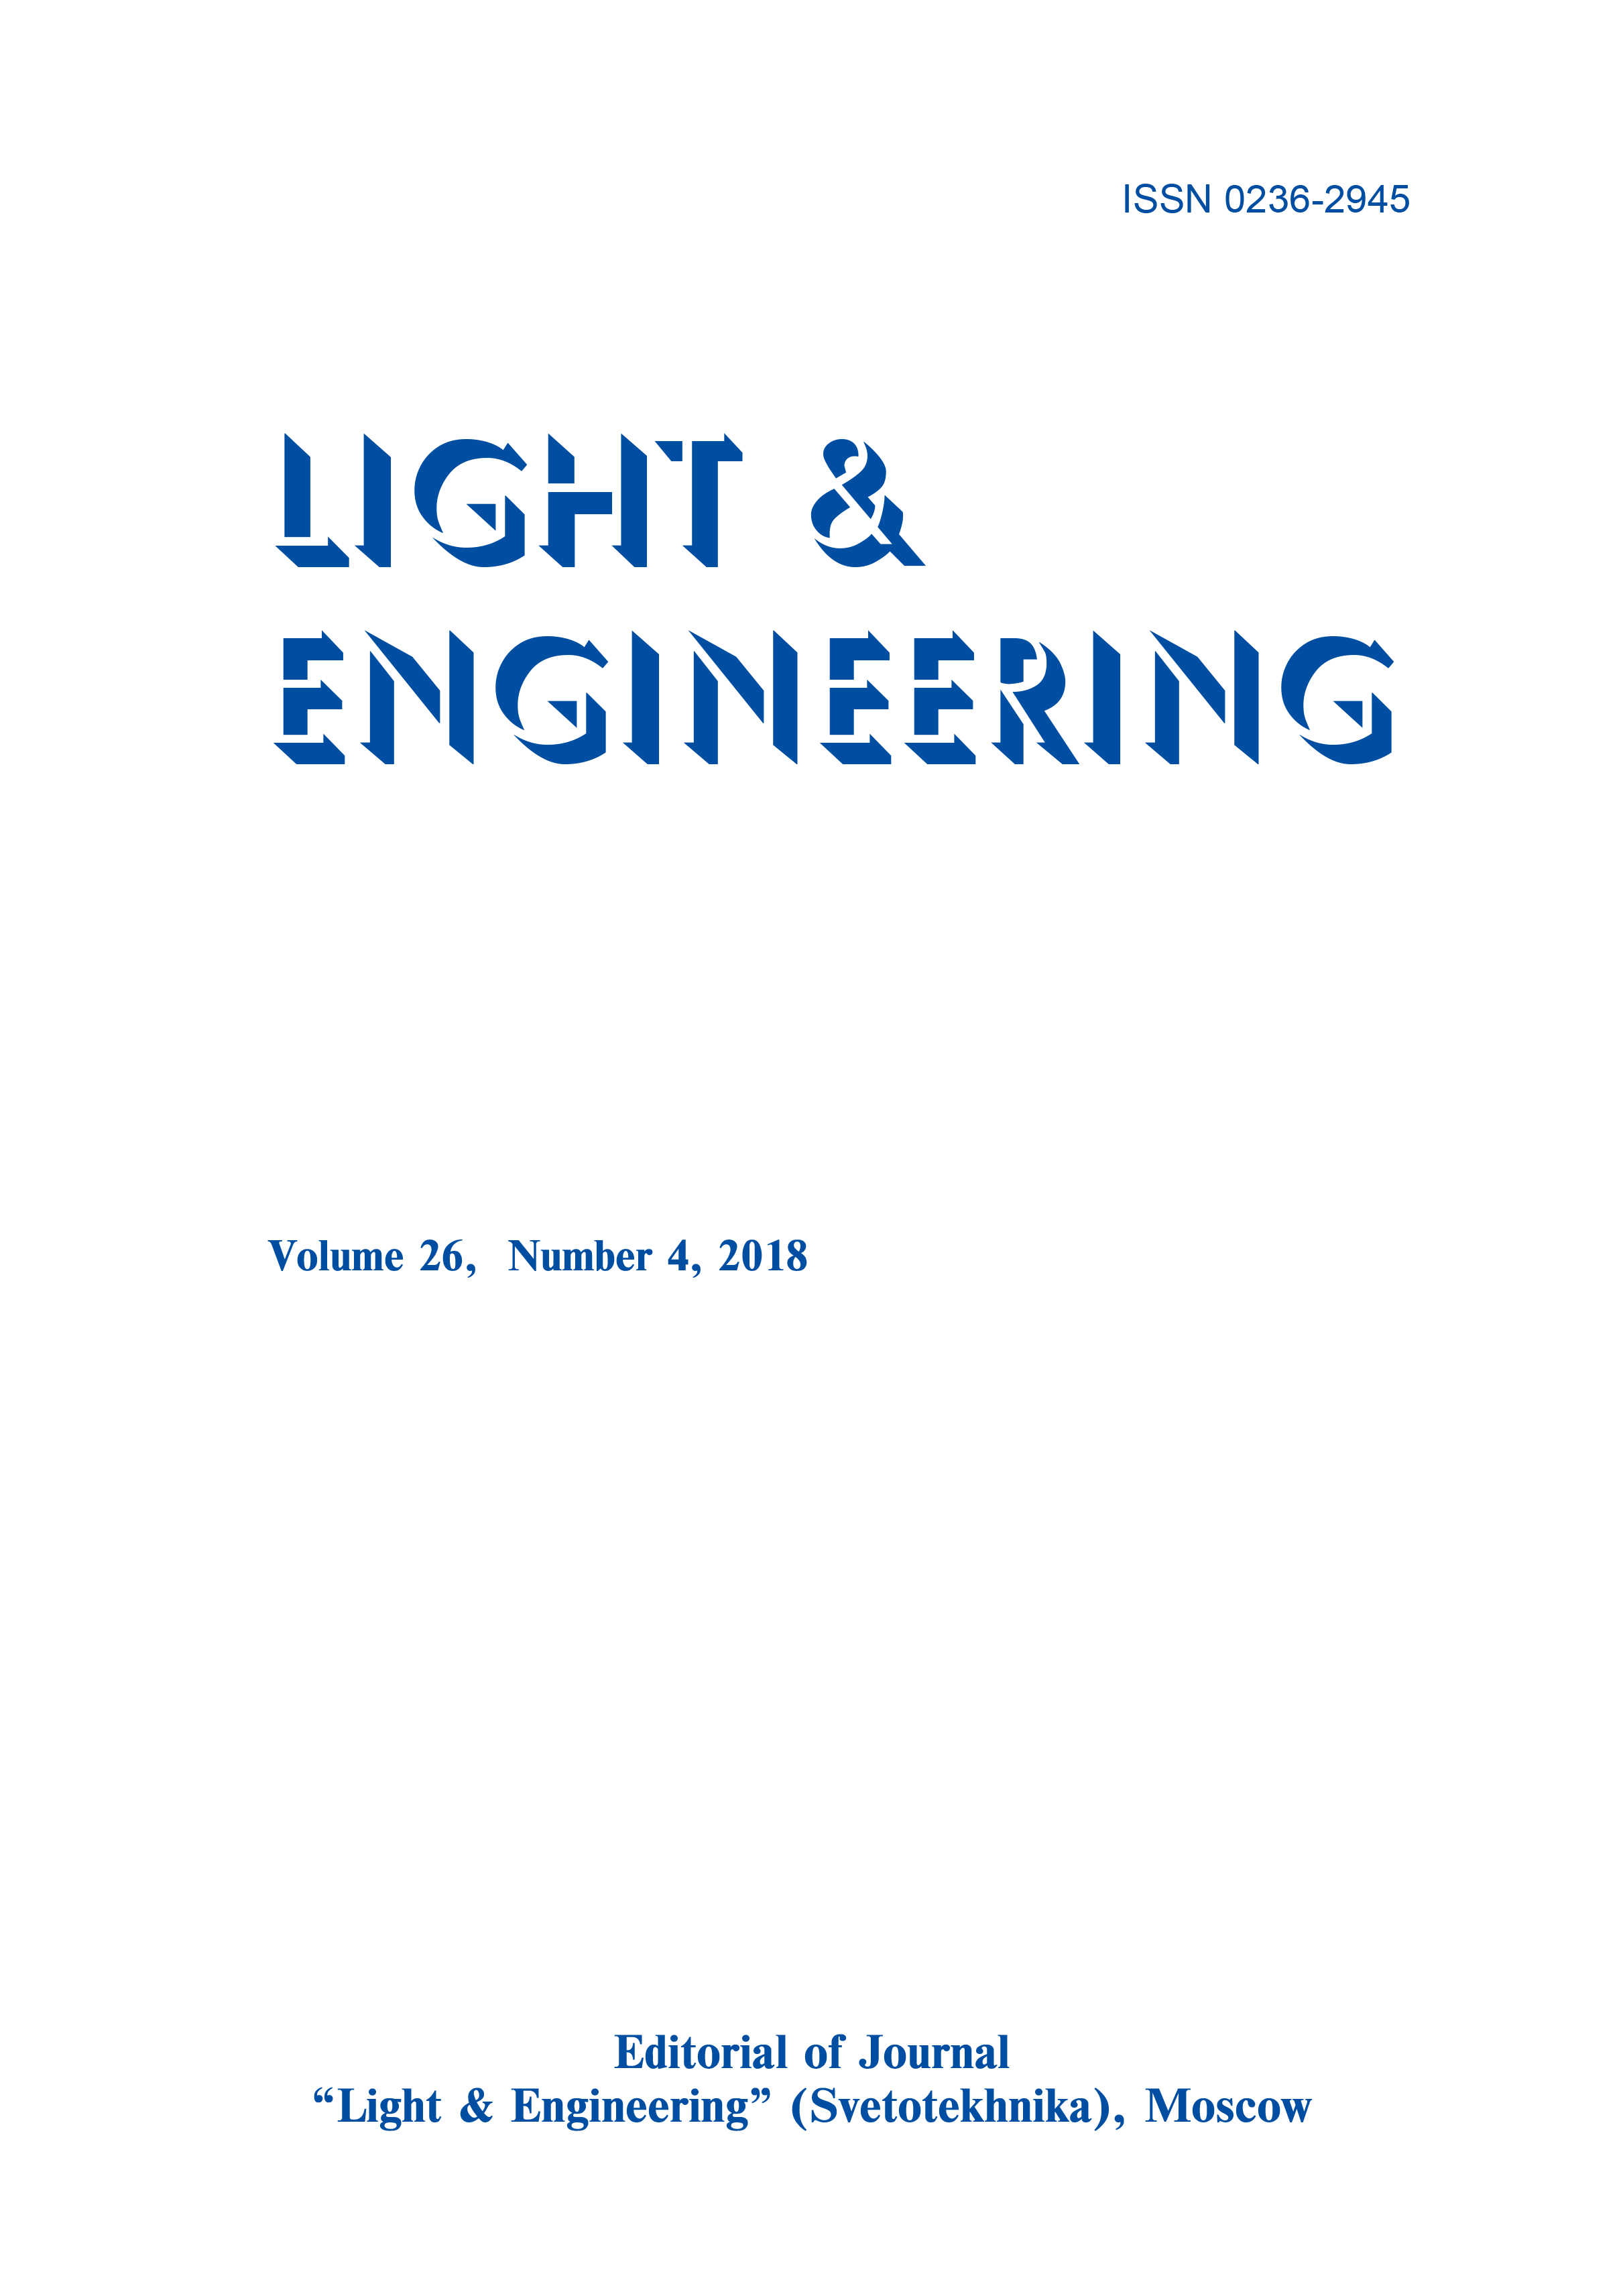 Legal Regulation of Public-Private Partnership Supporting the Development of Energy-Efficient Lighting Industry. L&E 26 (4) 2018